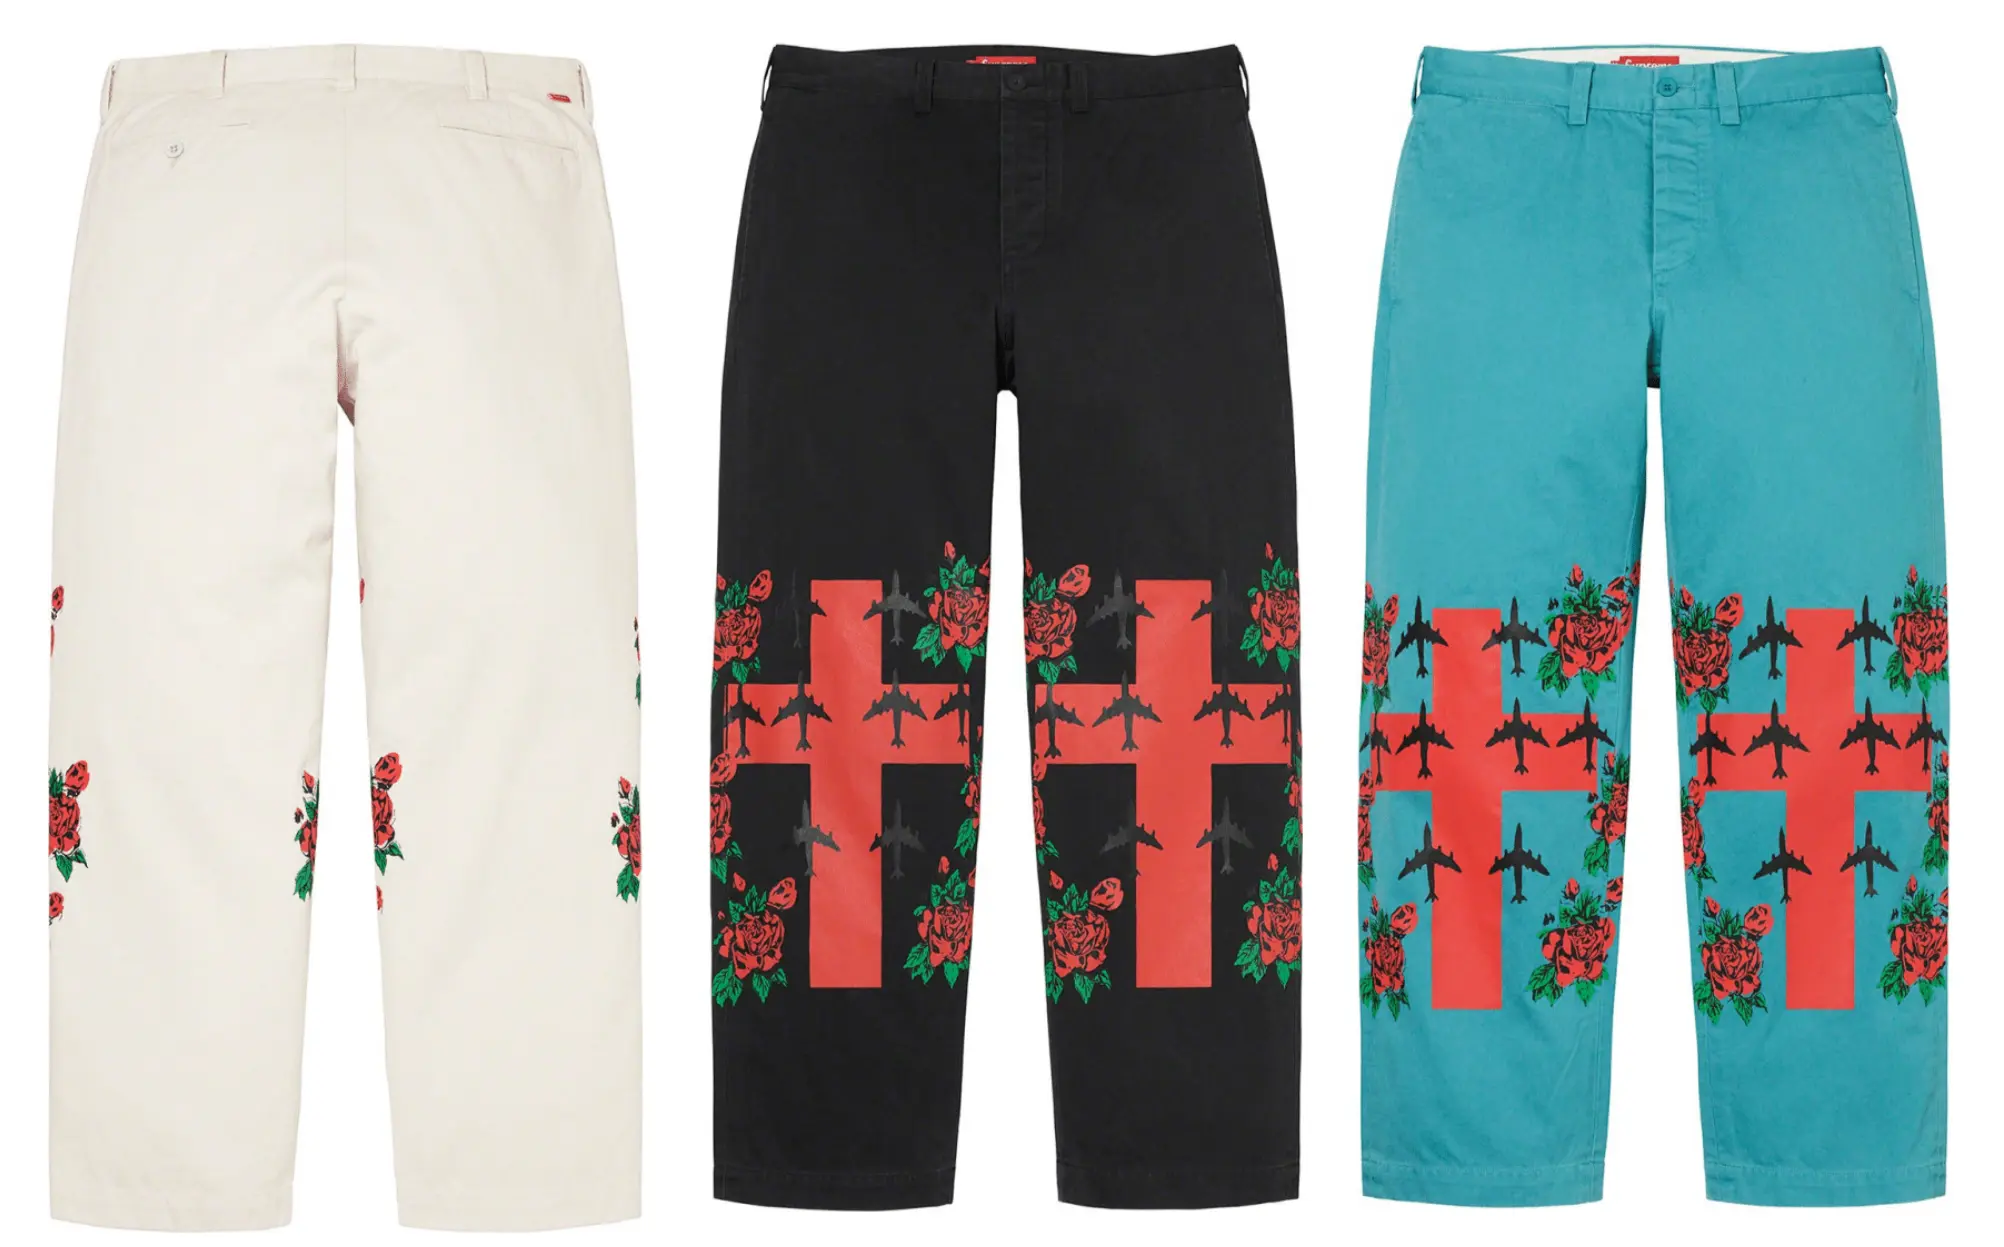 Supreme Destruction of Purity Chino Pant